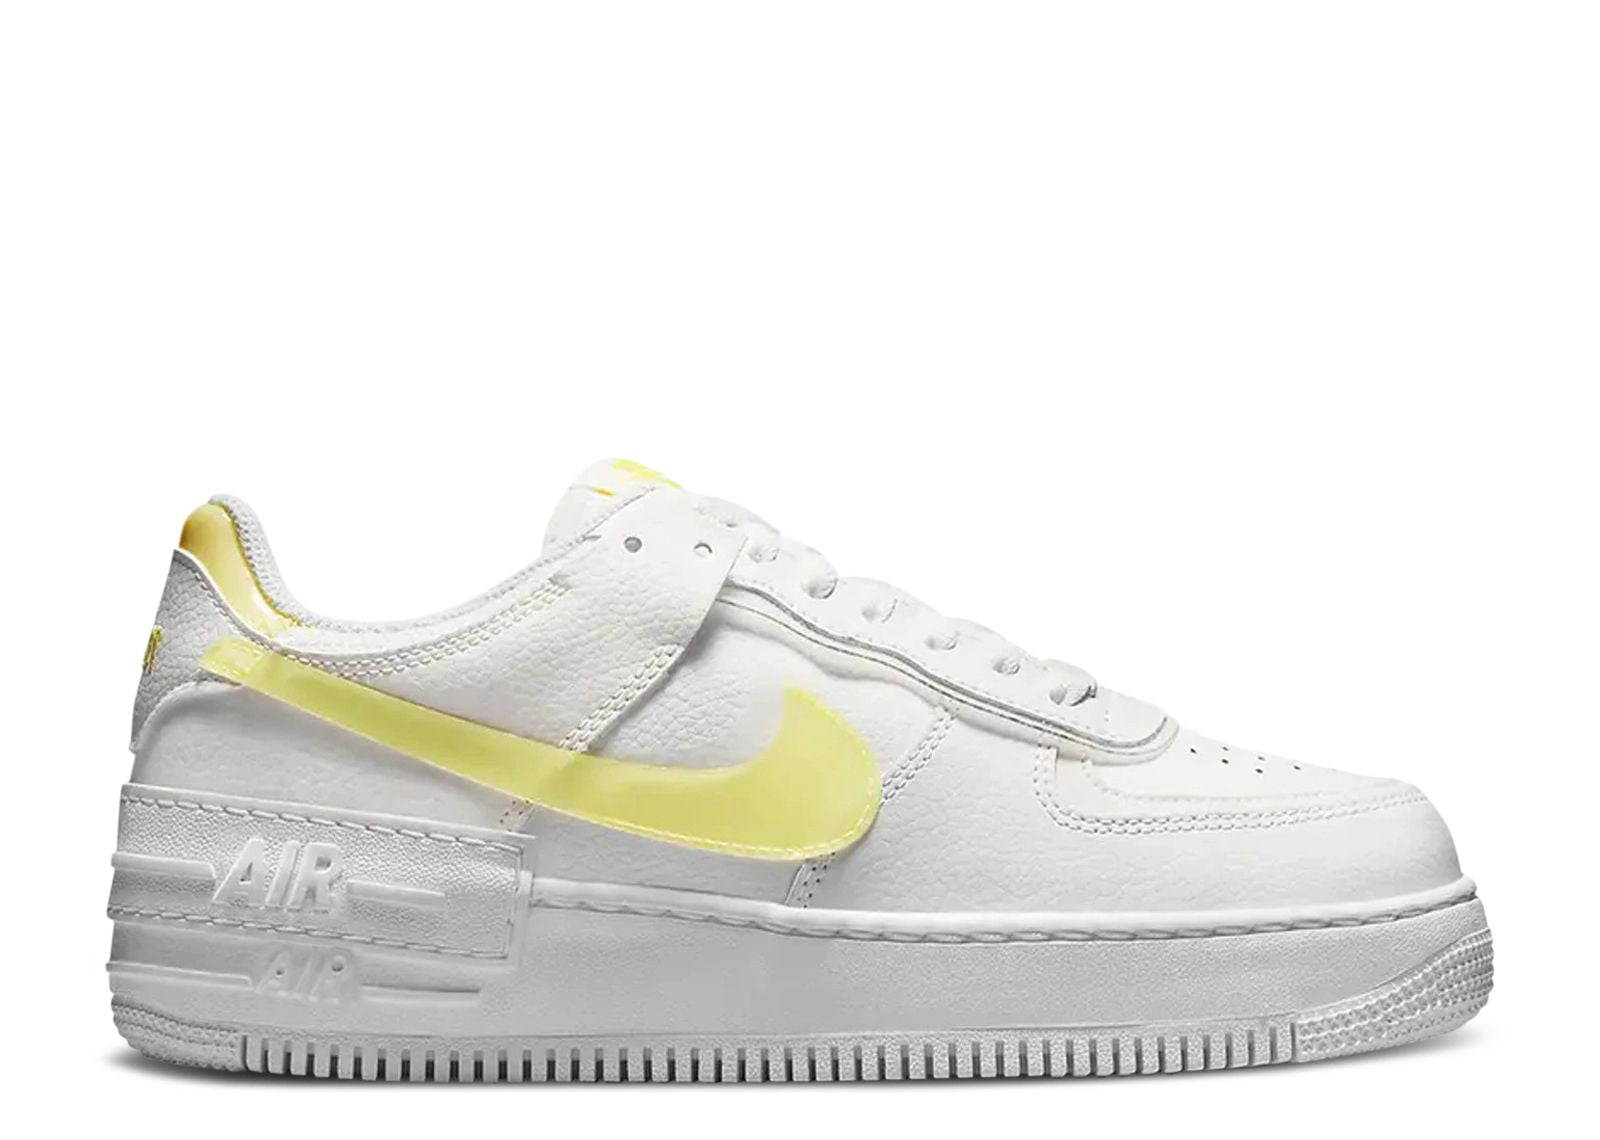 Second Chance - Air Force 1 Shadow White Opti Yellow - 40